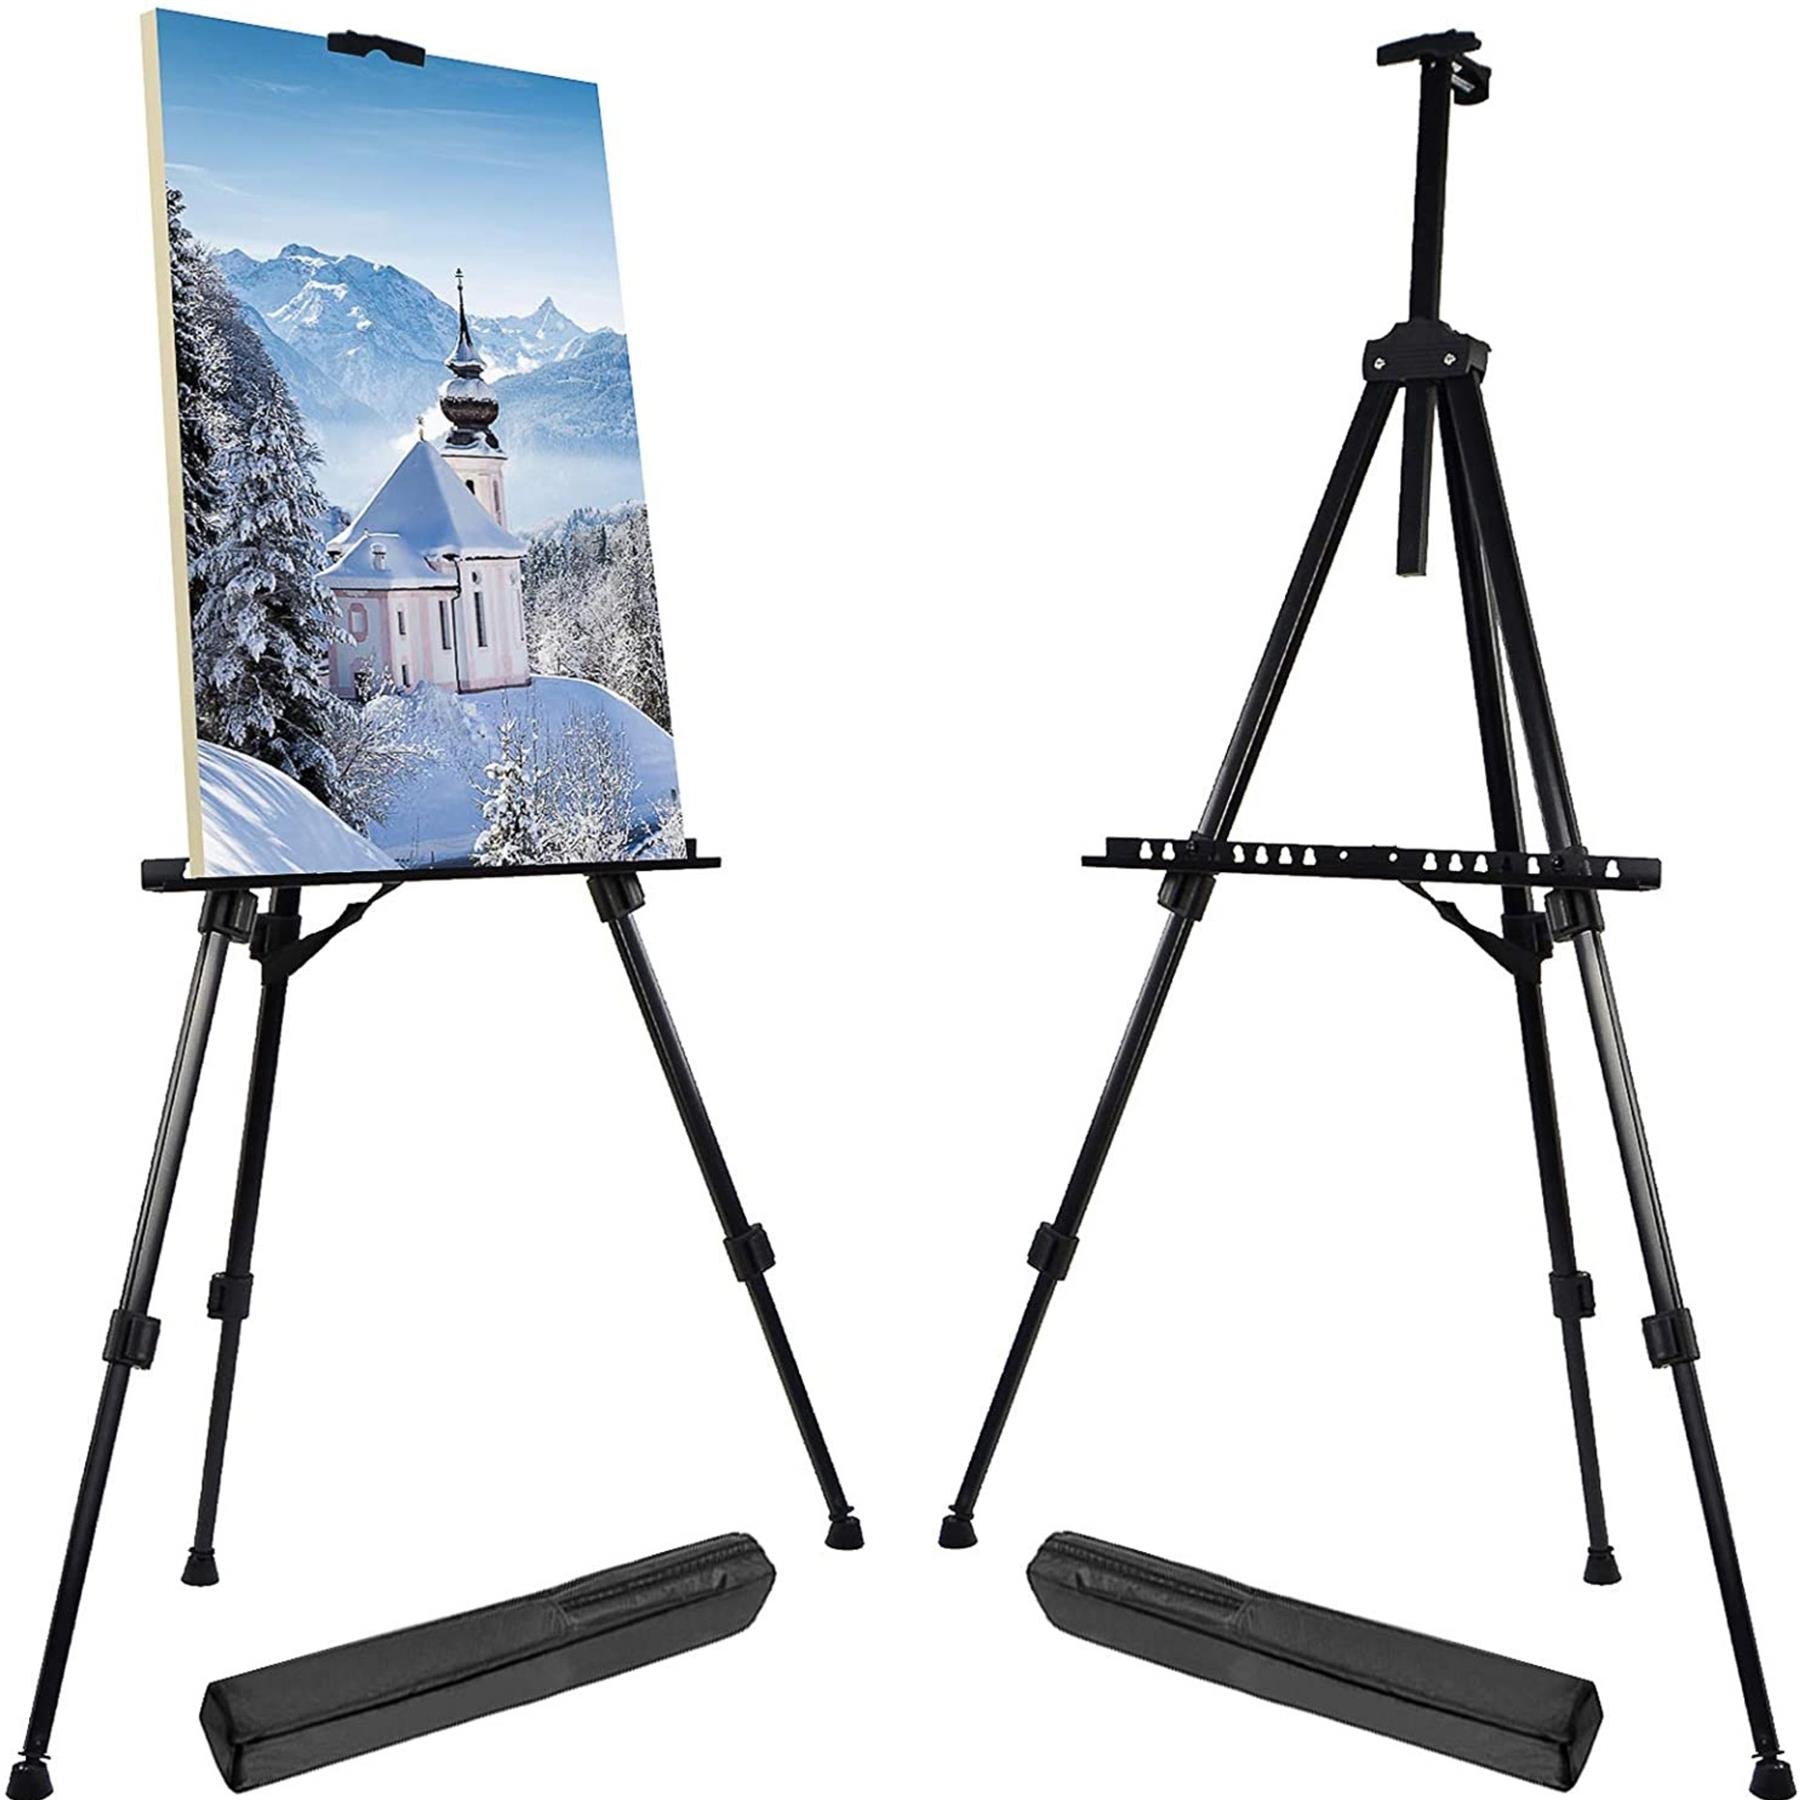 Geezy Easel Foldable Easel Painting Display Stand